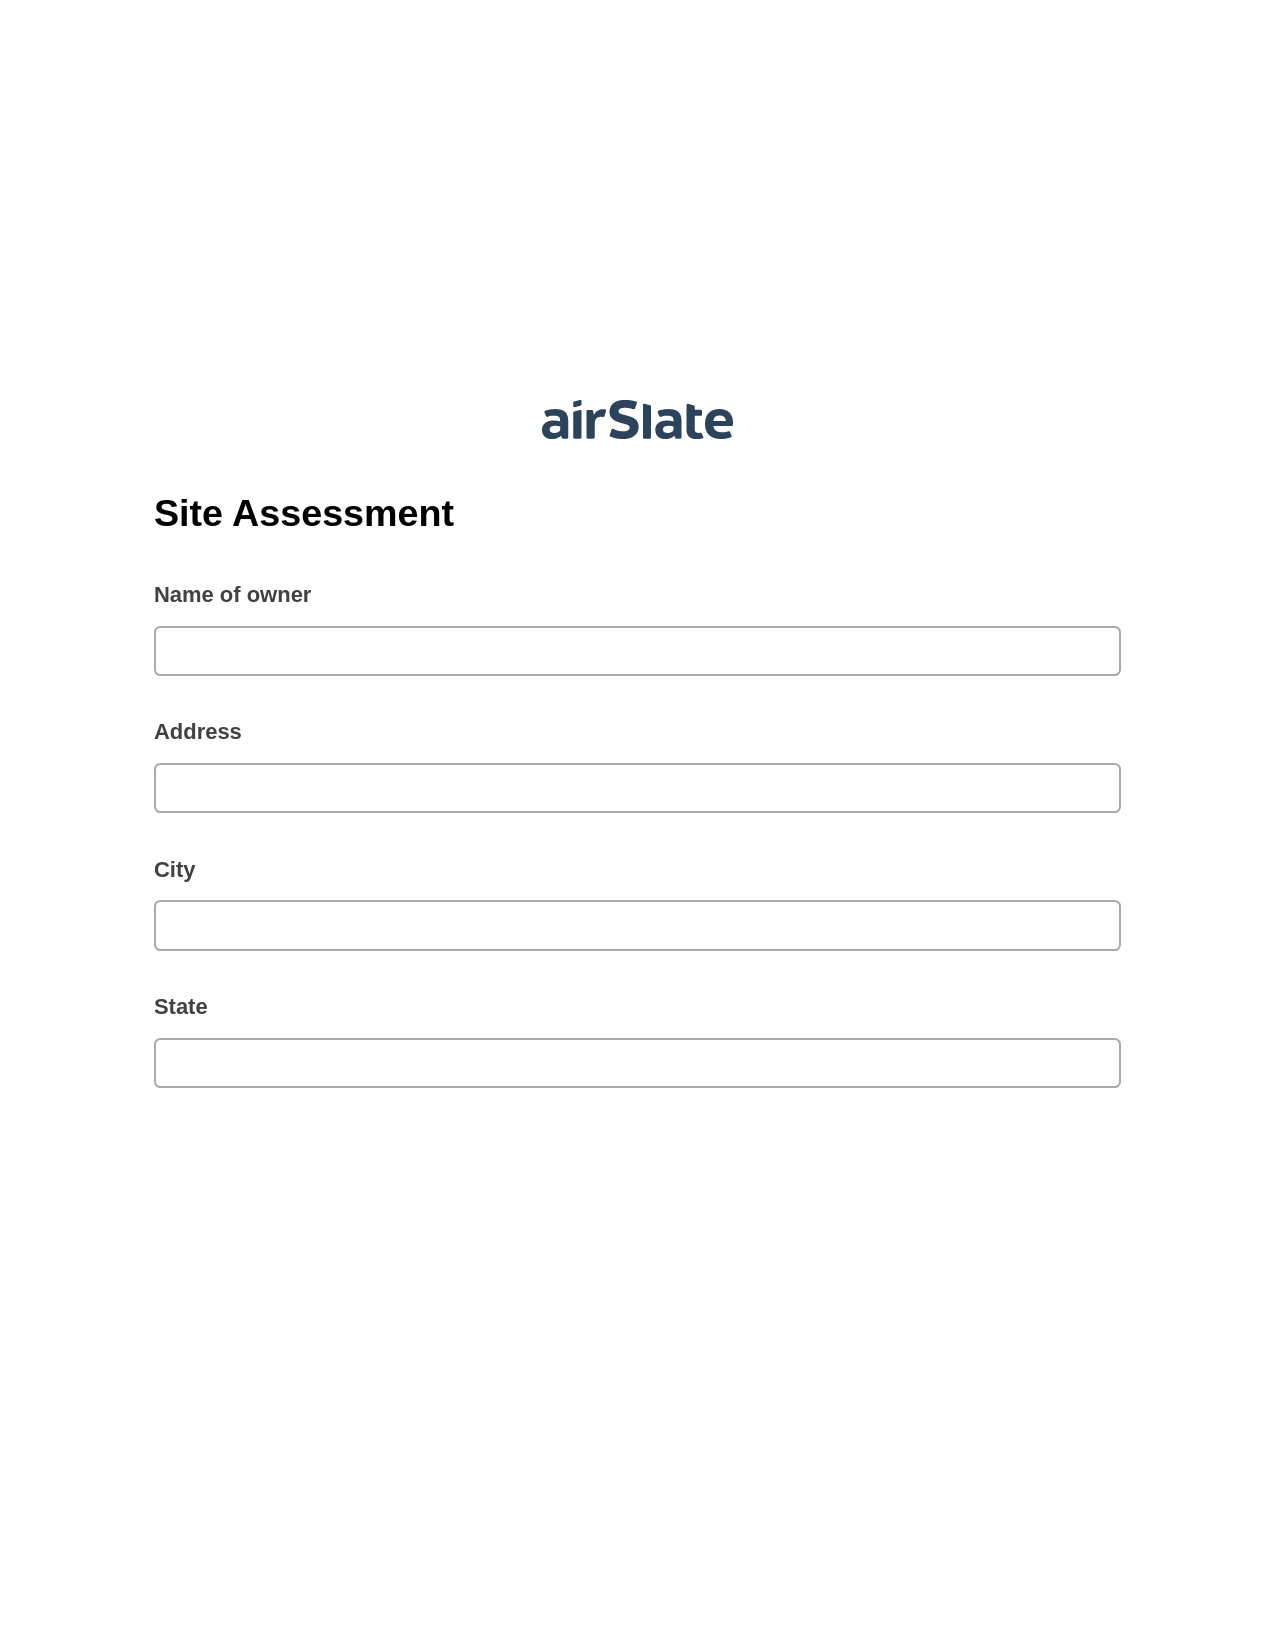 Site Assessment Pre-fill from Excel Spreadsheet Bot, Text Message Notification Bot, Post-finish Document Bot